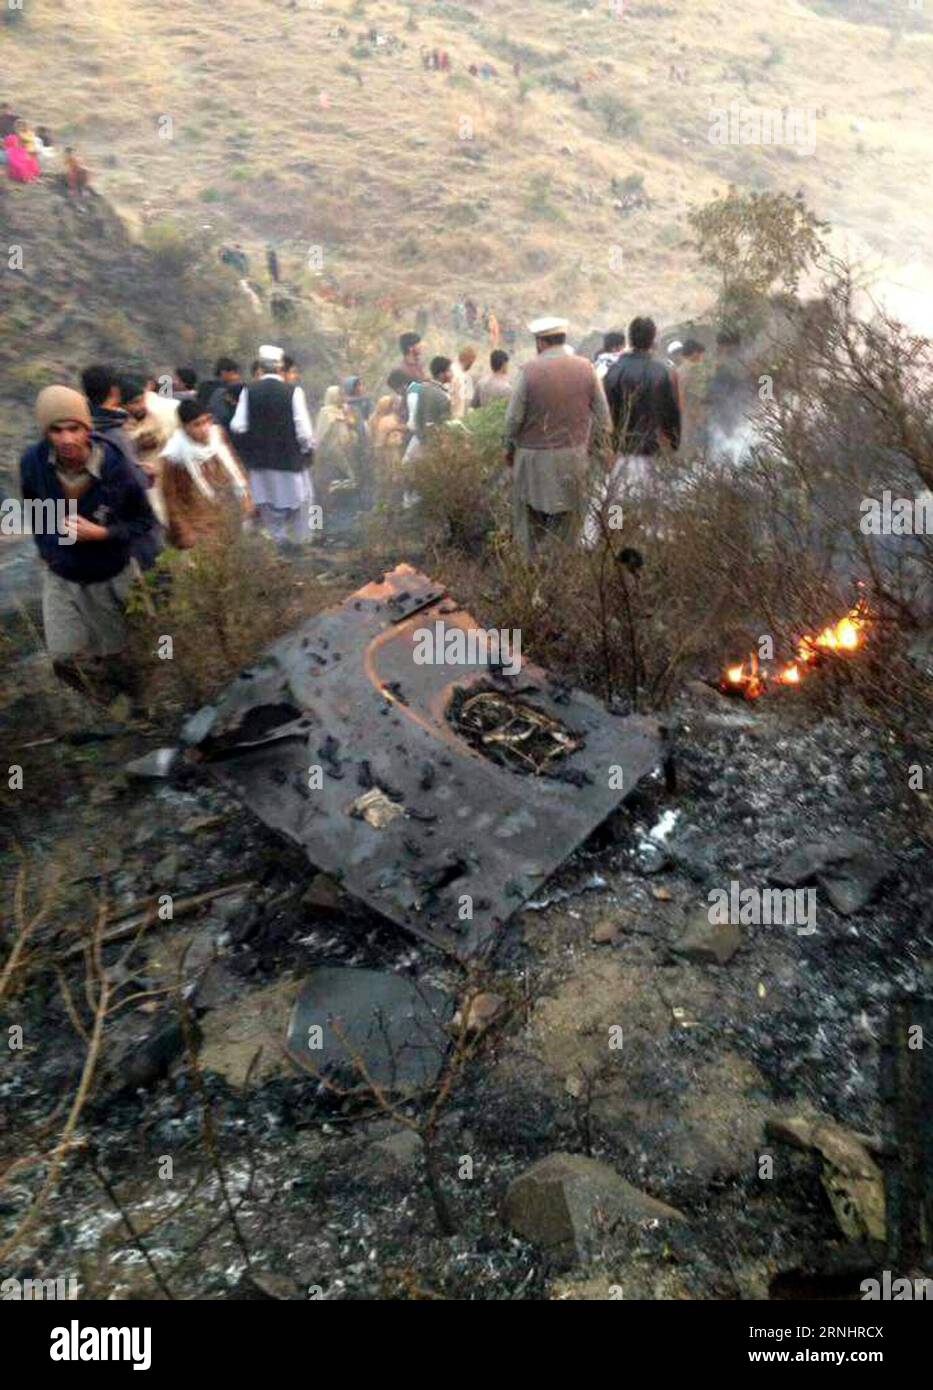 Pakistanisches Passagierflugzeug abgestürzt (161207) -- HAVELIAN (PAKISTAN), Dec. 7, 2016 -- Photo taken on Dec. 7, 2016 shows locals gathering at a plane crash site in Pakistan s Havelian. Rescue work is underway after a passenger plane of Pakistan International Airlines (PIA) with 47 people on board crashed in the country s northern Havelian area on Wednesday, officials said. ) (sxk) PAKISTAN-HAVELIAN-PLANE CRASH Stringer PUBLICATIONxNOTxINxCHN   Pakistani Passenger aircraft crashed   Pakistan DEC 7 2016 Photo Taken ON DEC 7 2016 Shows Locals Gathering AT a Plane Crash Site in Pakistan S  Re Stock Photo